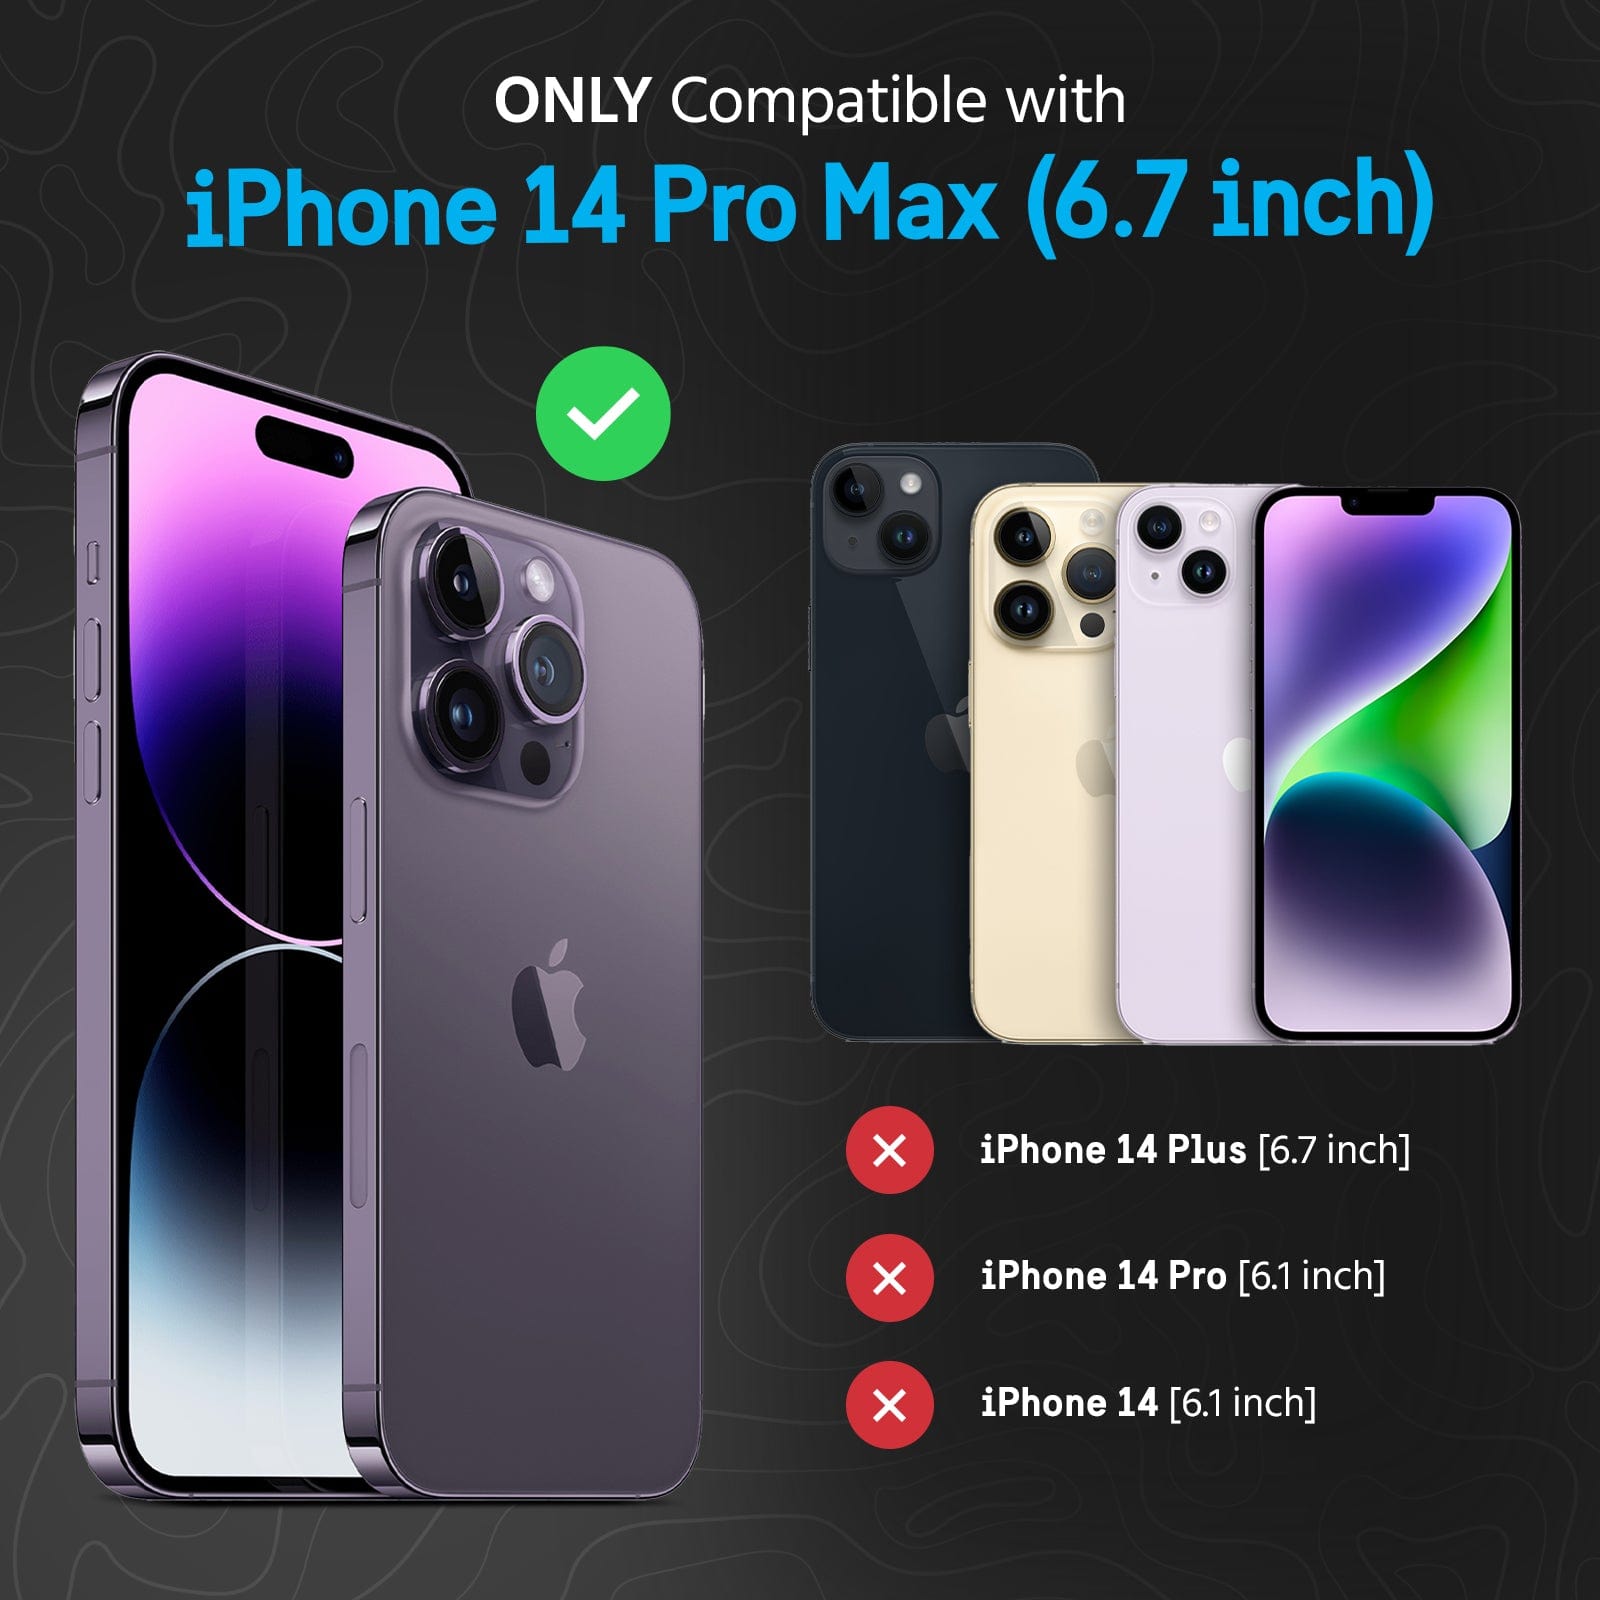 ONLY COMPATIBLE WITH IPHONE 14 PRO MAX (6.7 INCH)